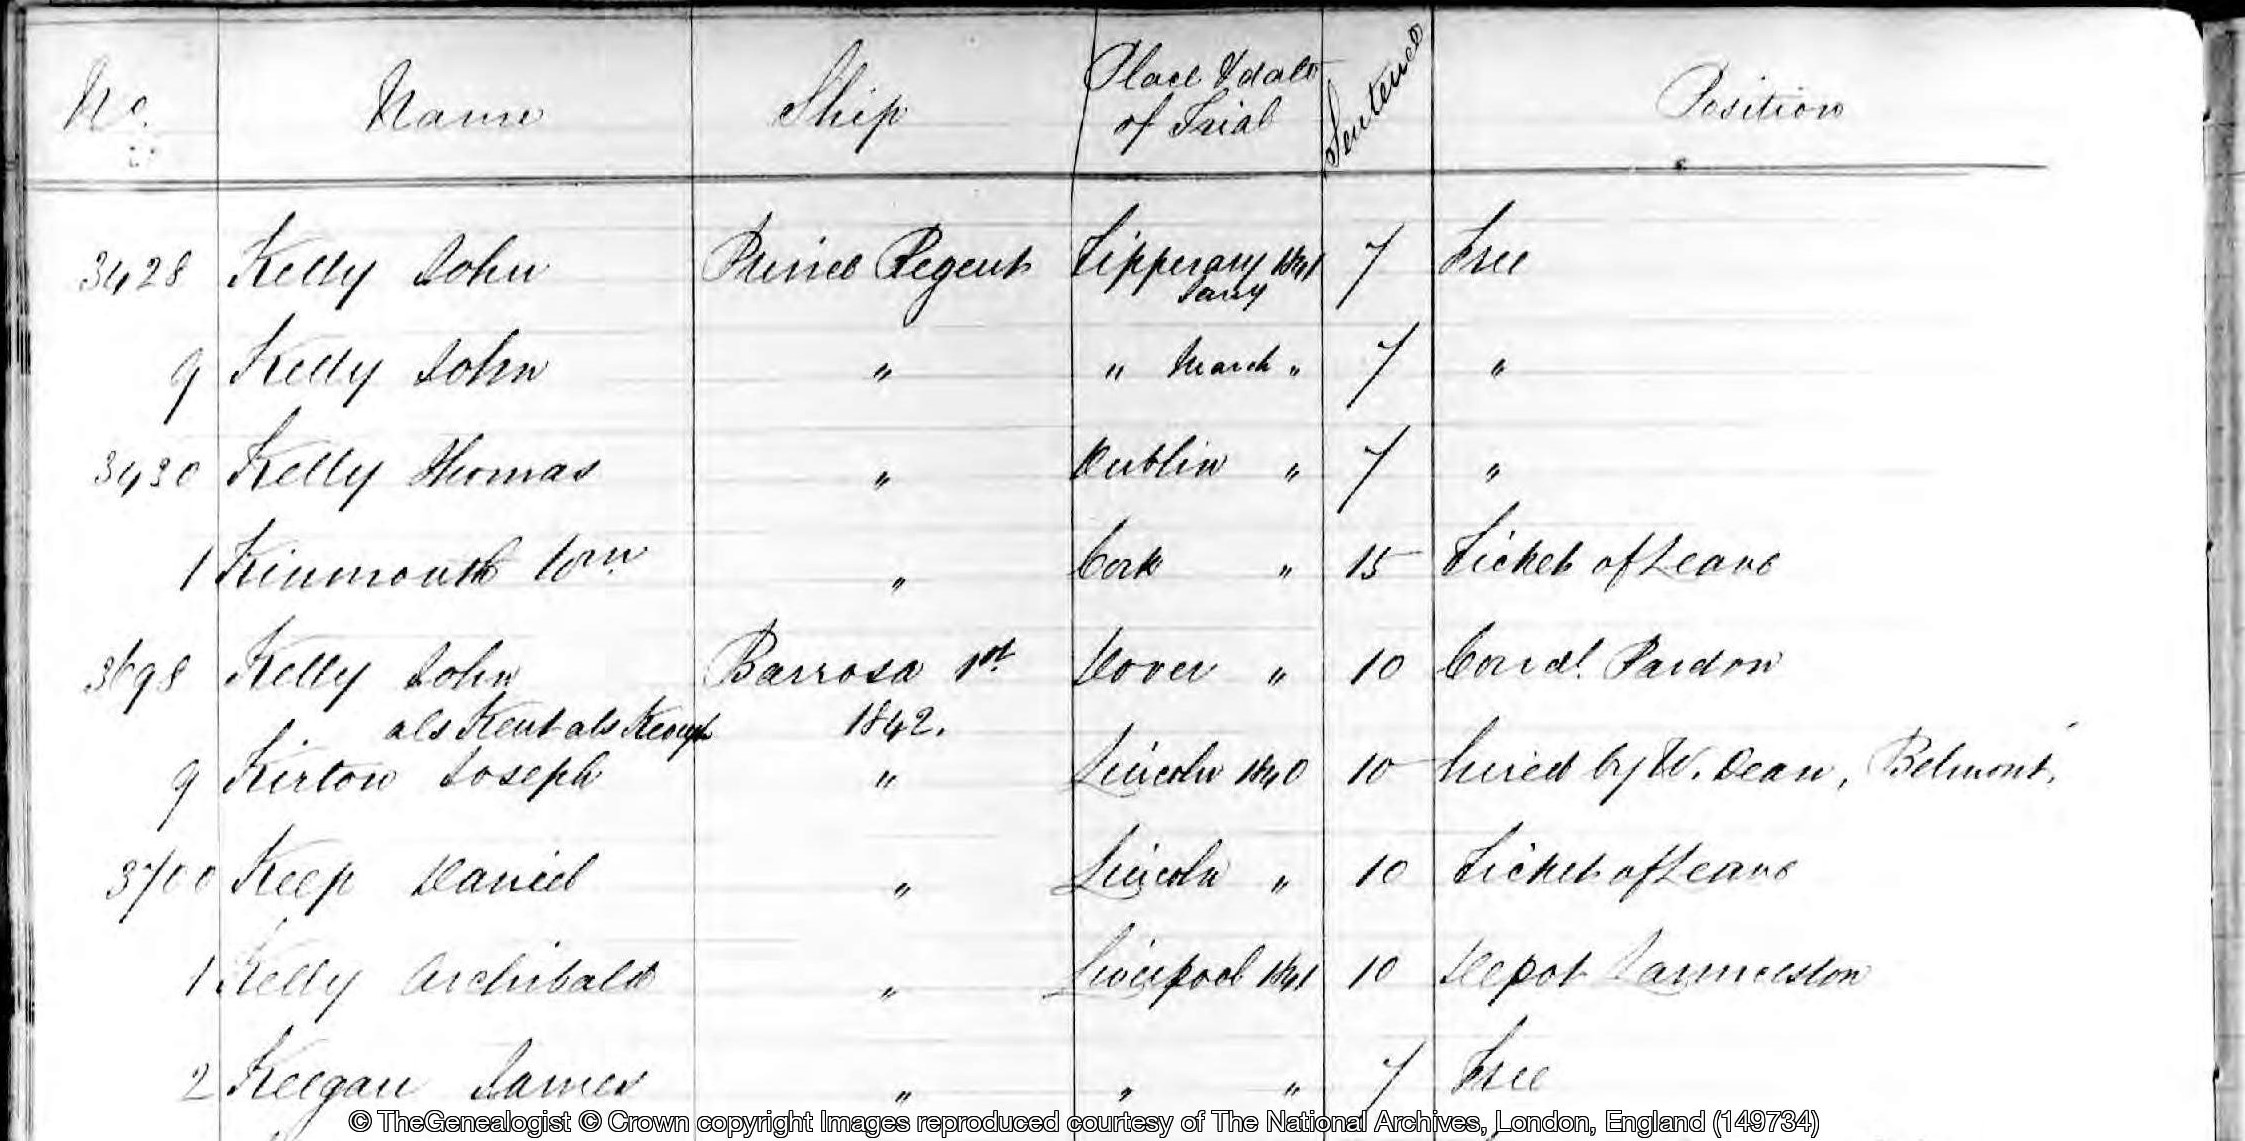 After serving his sentence he was freed as shown in the Ledger returns on TheGenealogist